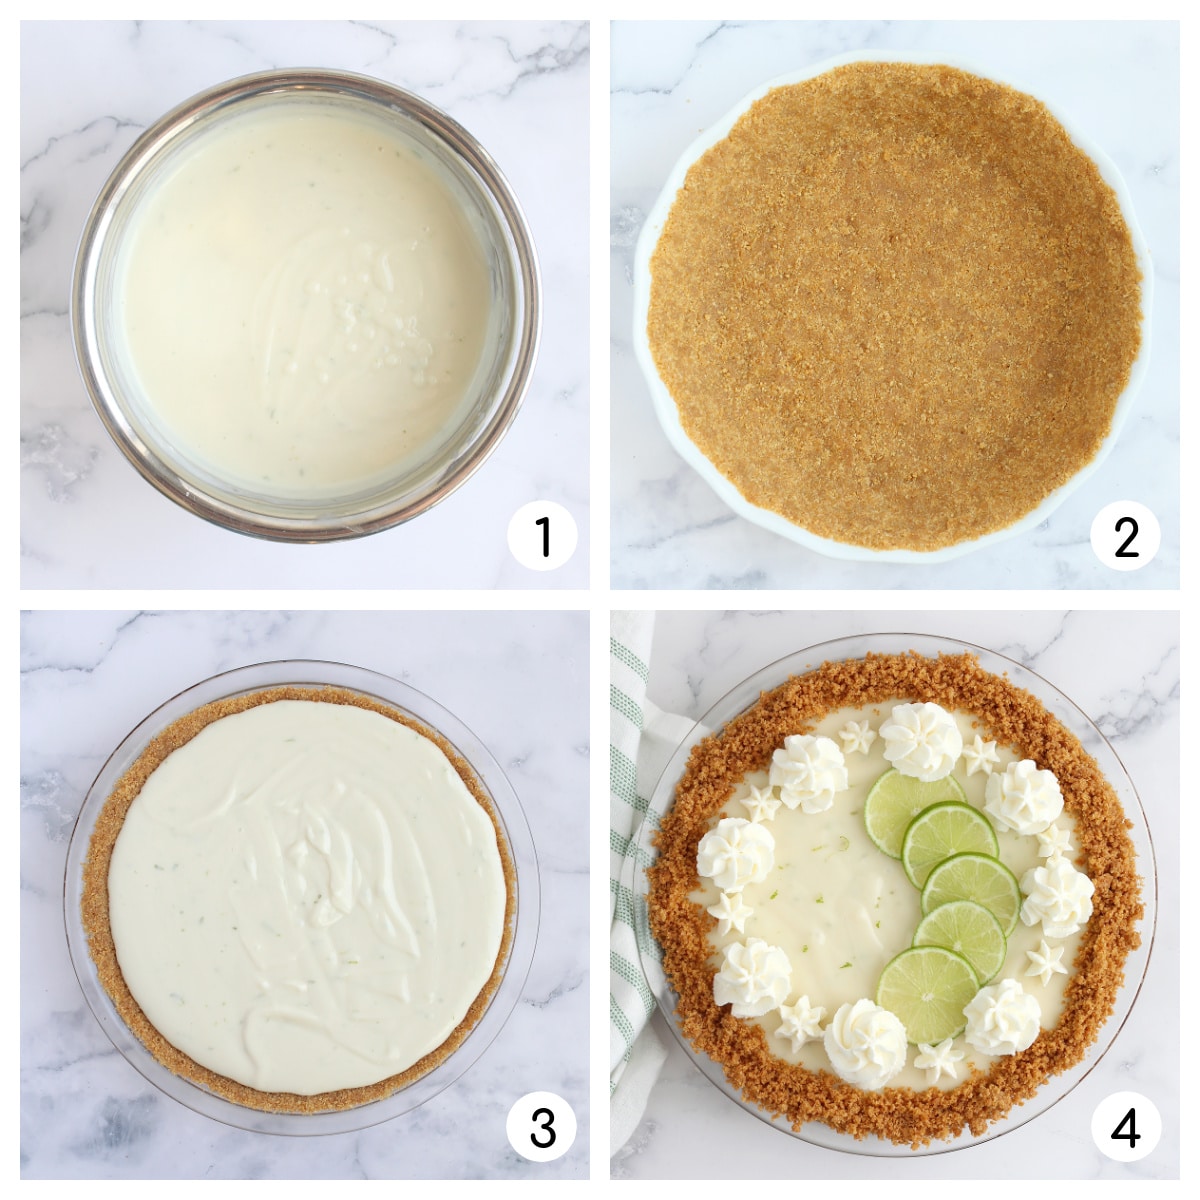 Process shots for how to make key lime pie.